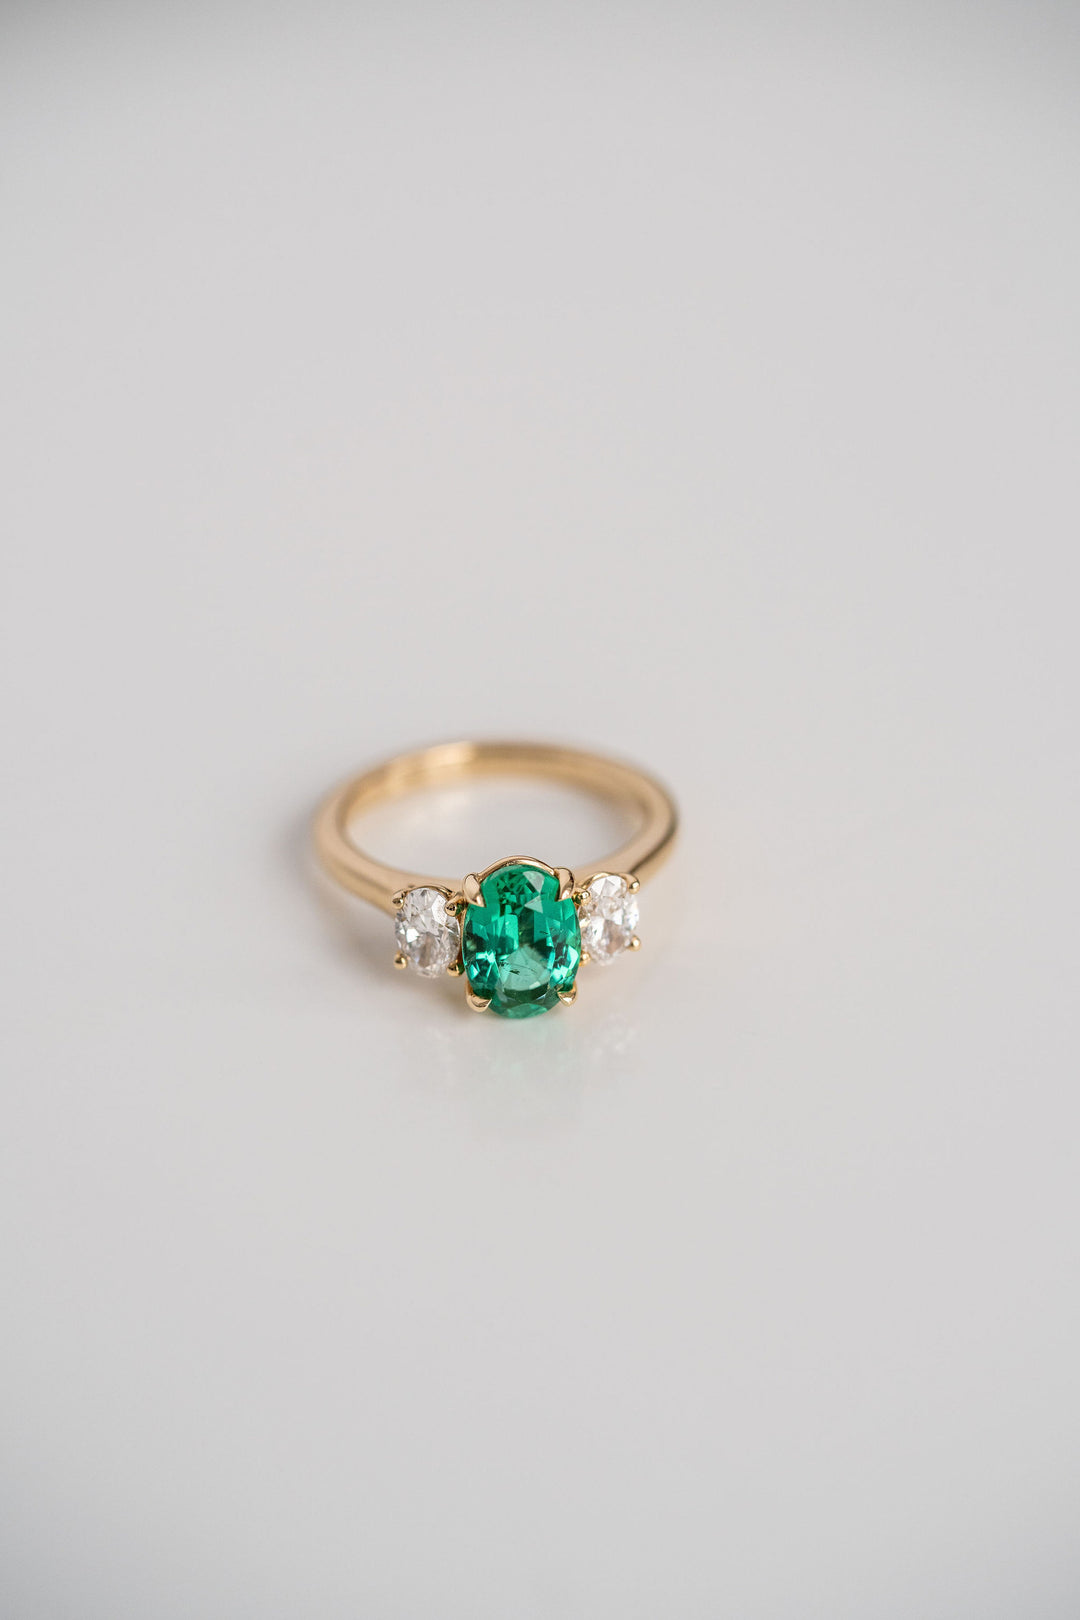 1.77ct. Oval Zambian Emerald With Oval Diamond Accents, 14k Yellow Gold